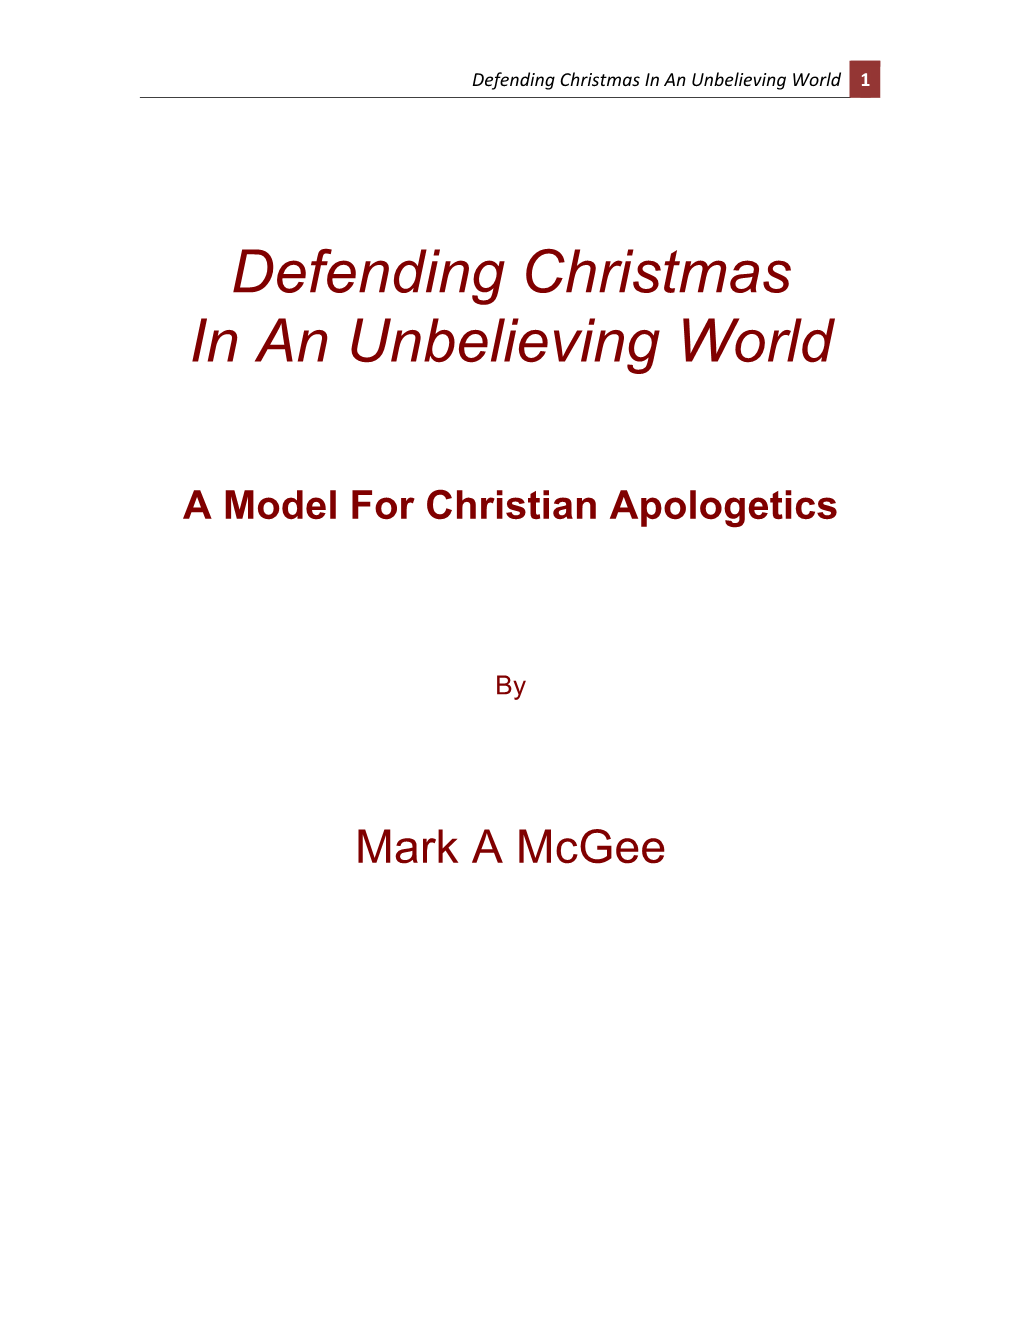 Defending Christmas in an Unbelieving World: a Model For